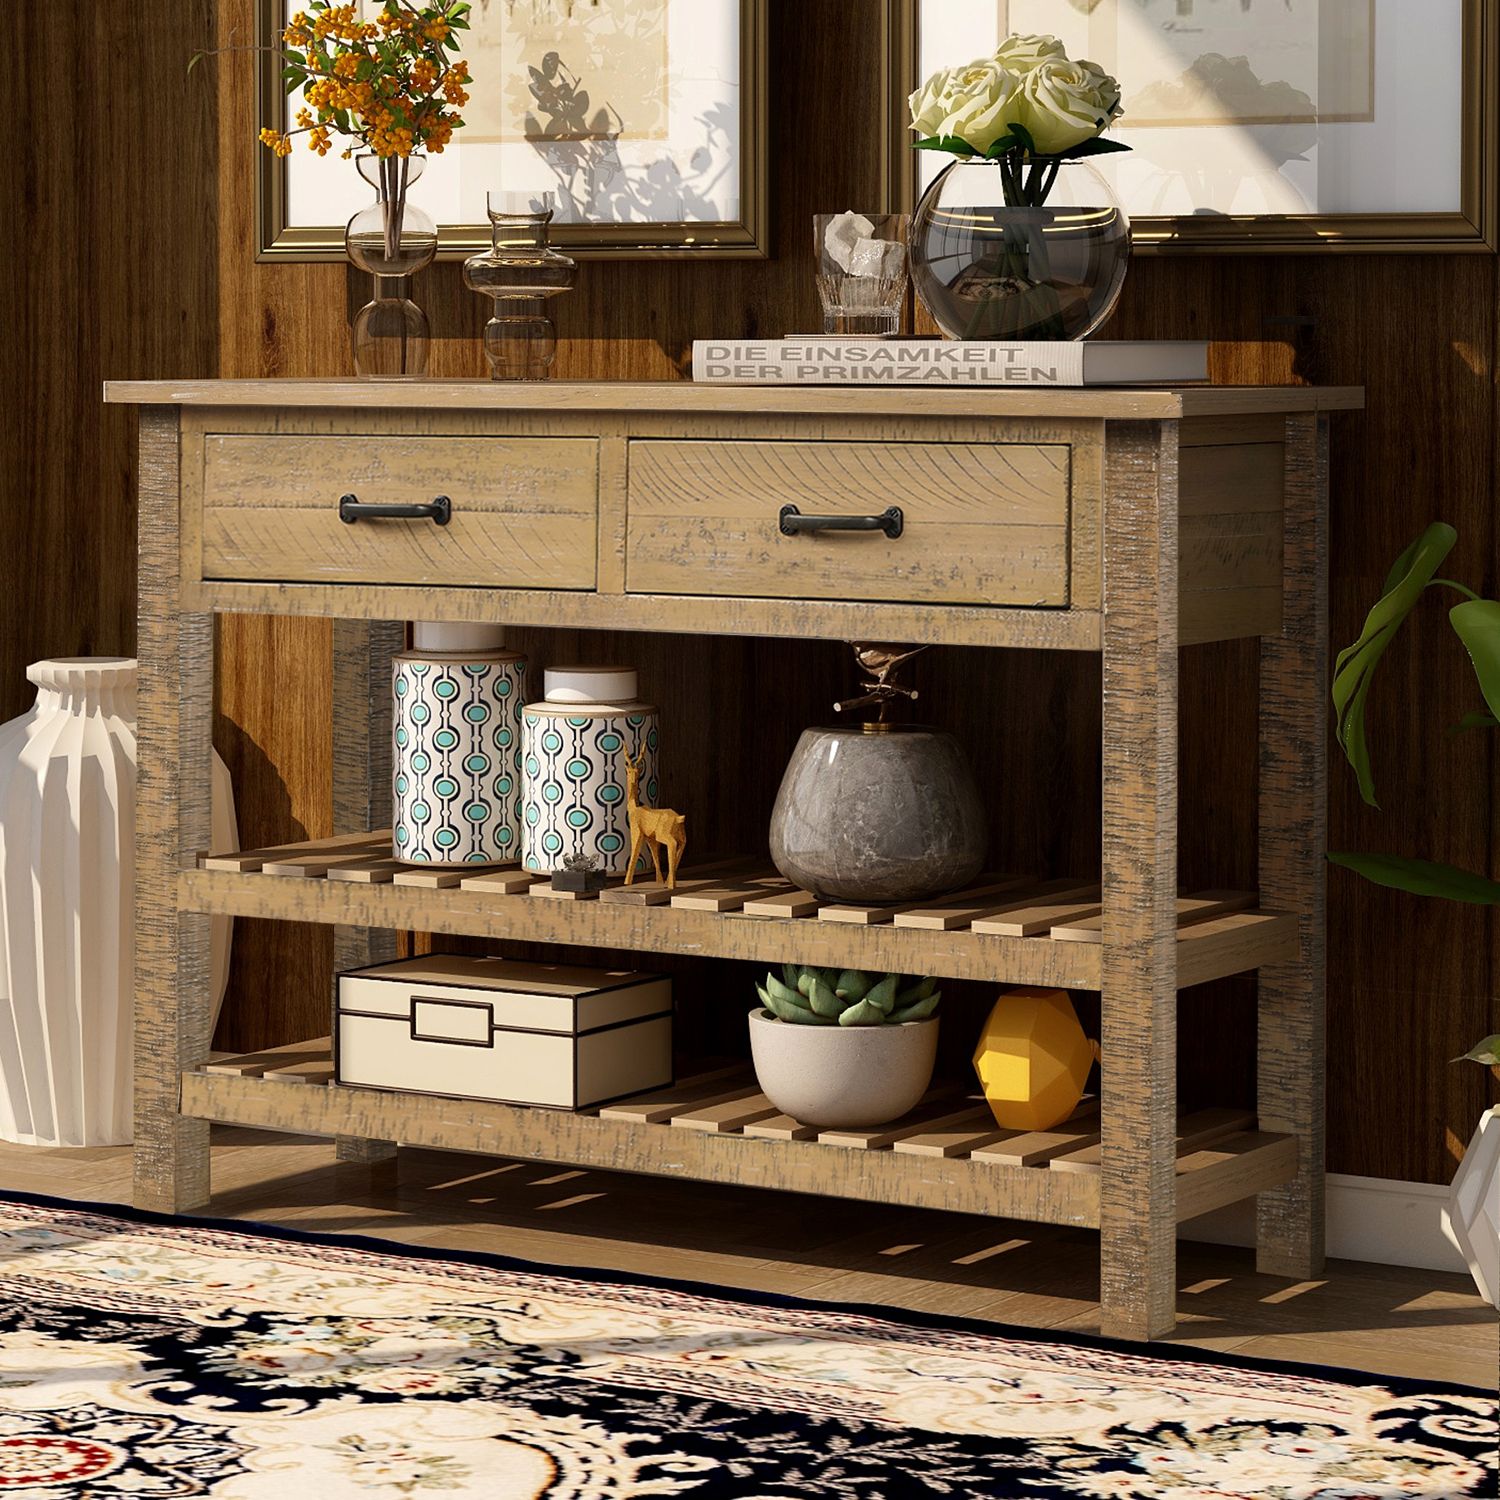 45" Console Table For Entryway, Btmway Modern Wood Narrow Entryway Inside Modern Farmhouse Console Tables (View 1 of 20)